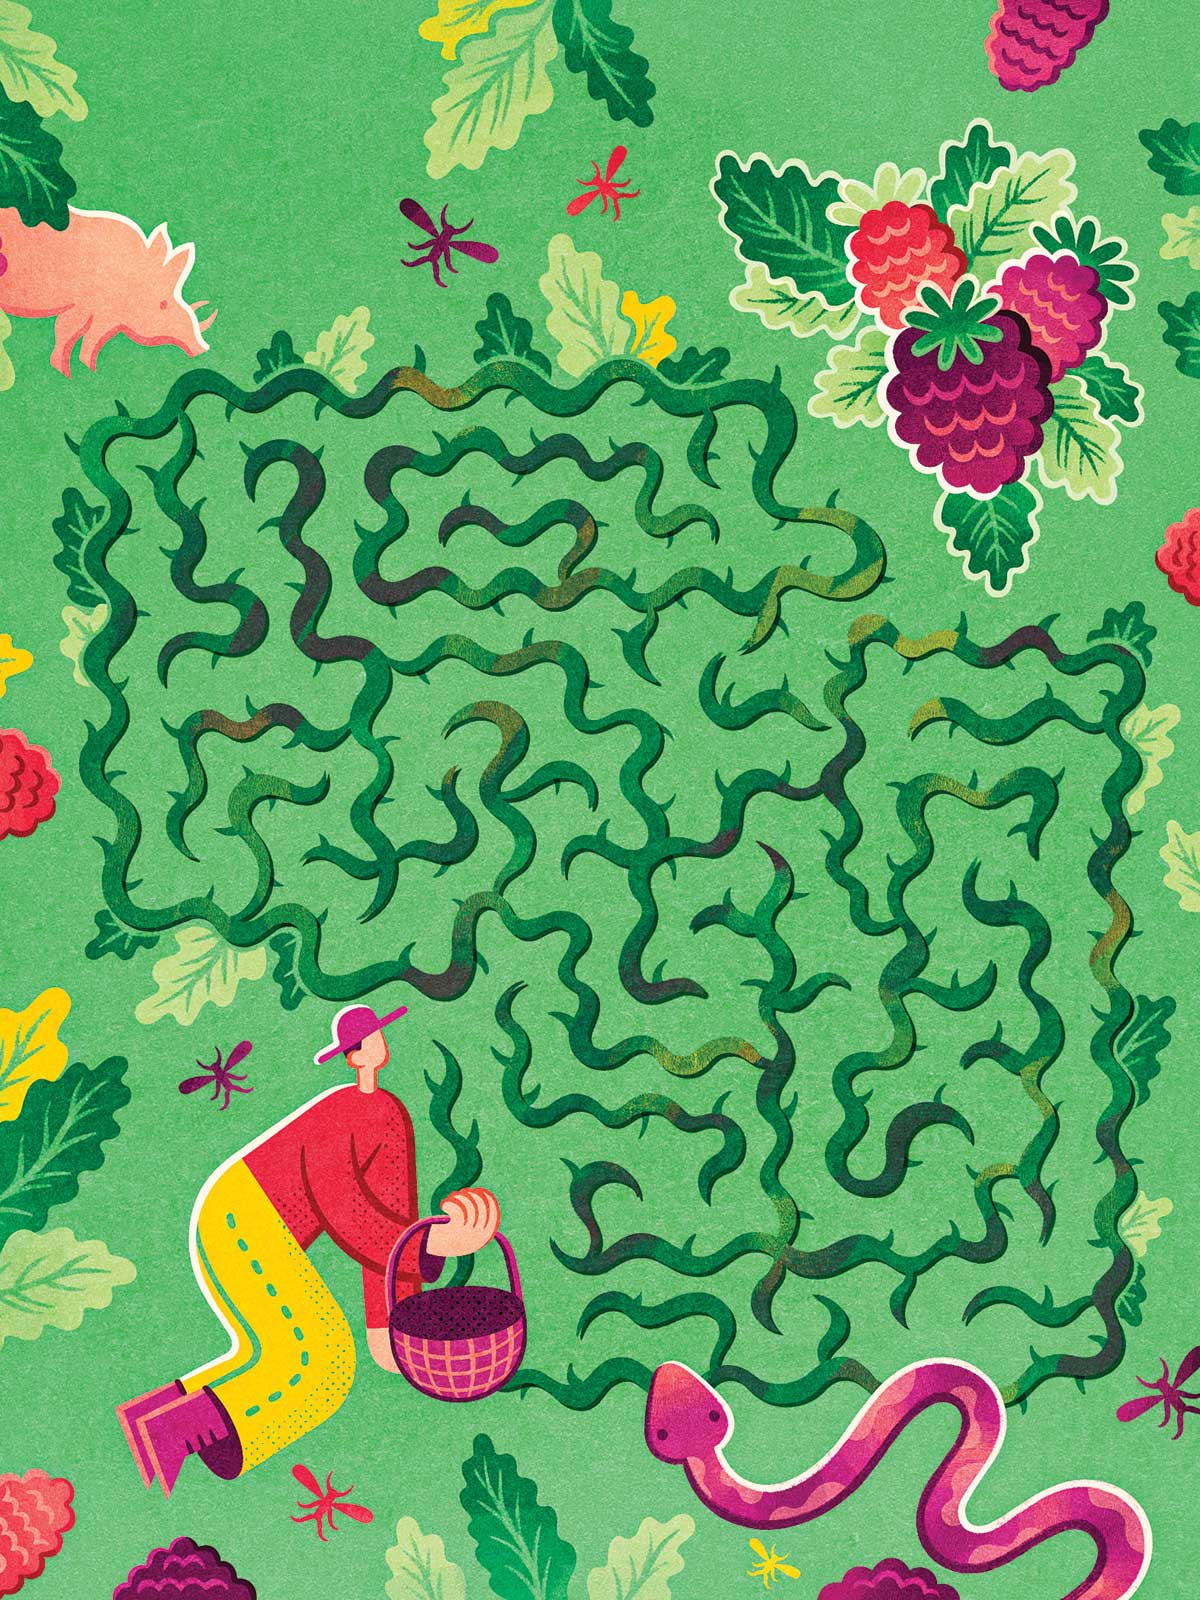 Colorful folk art style illustration with woman facing thorny vines that form a maze